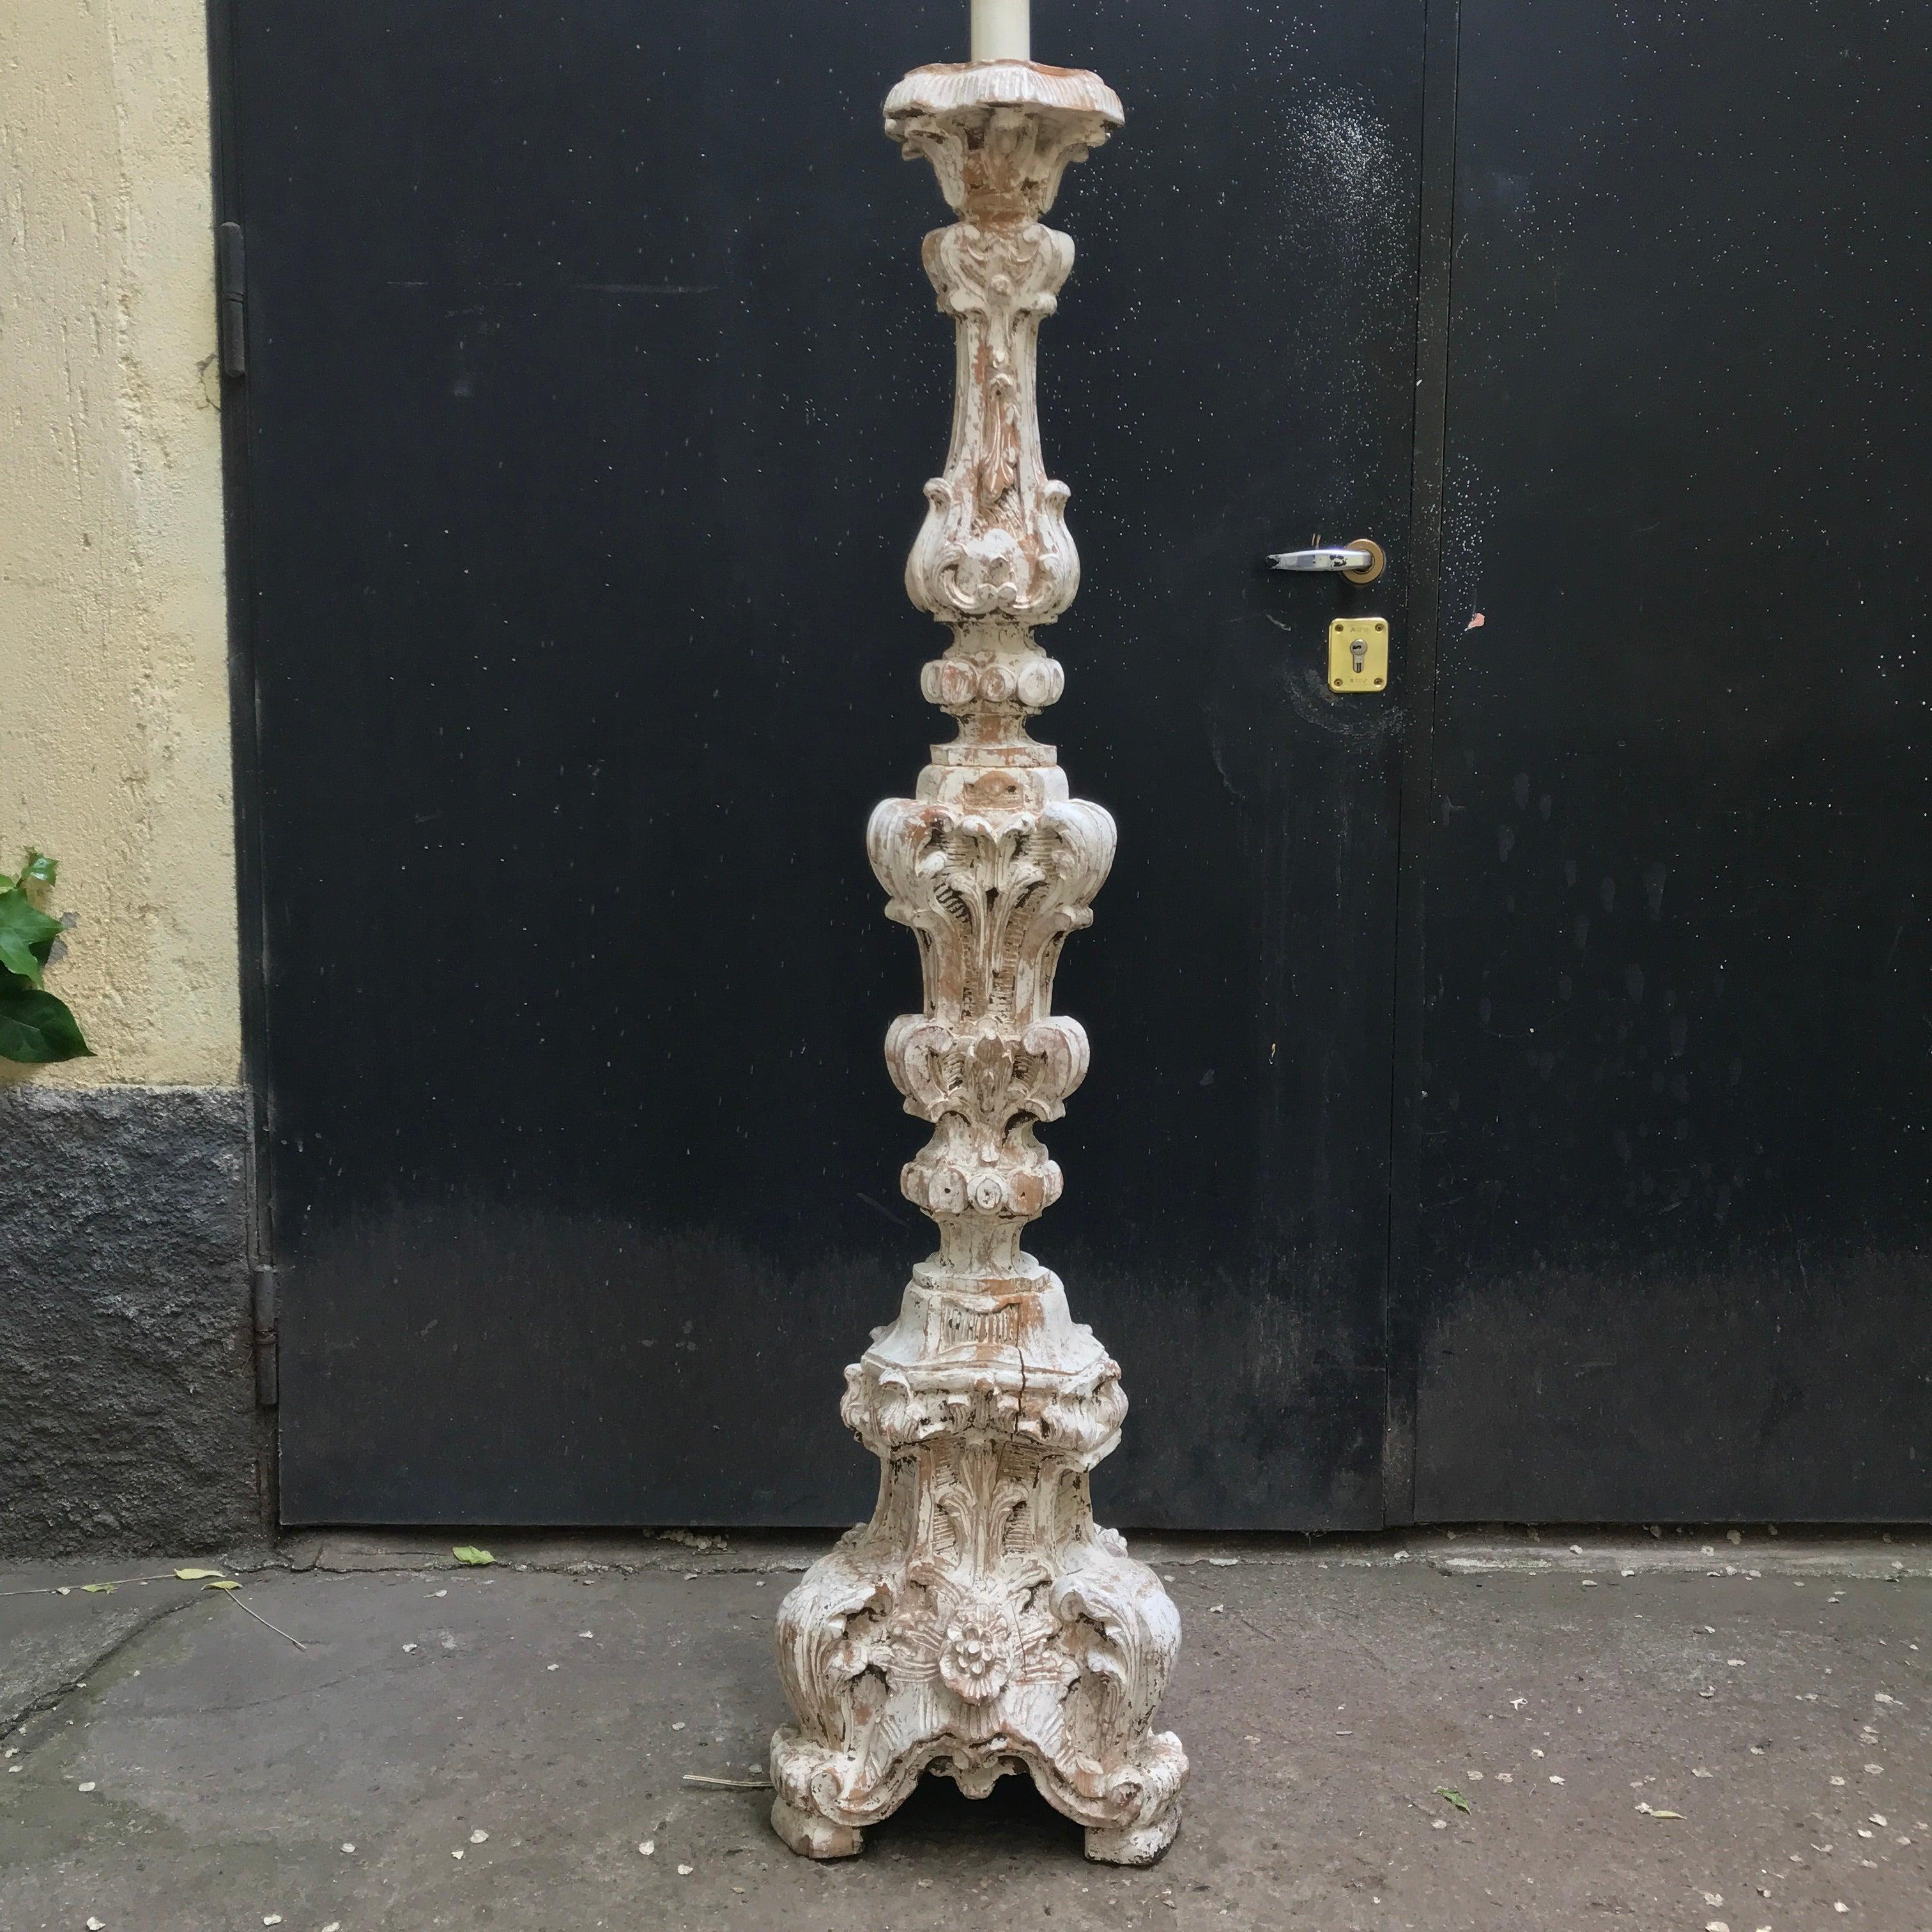 Italian Florentine hand carved wood torchère as floor lamp, a tall solid cembran pinewood pricket carved on three sides, with a deep acanthus leaf and flowers carving, resting on tripod base, dating back to 19th century but inspired to 18th century